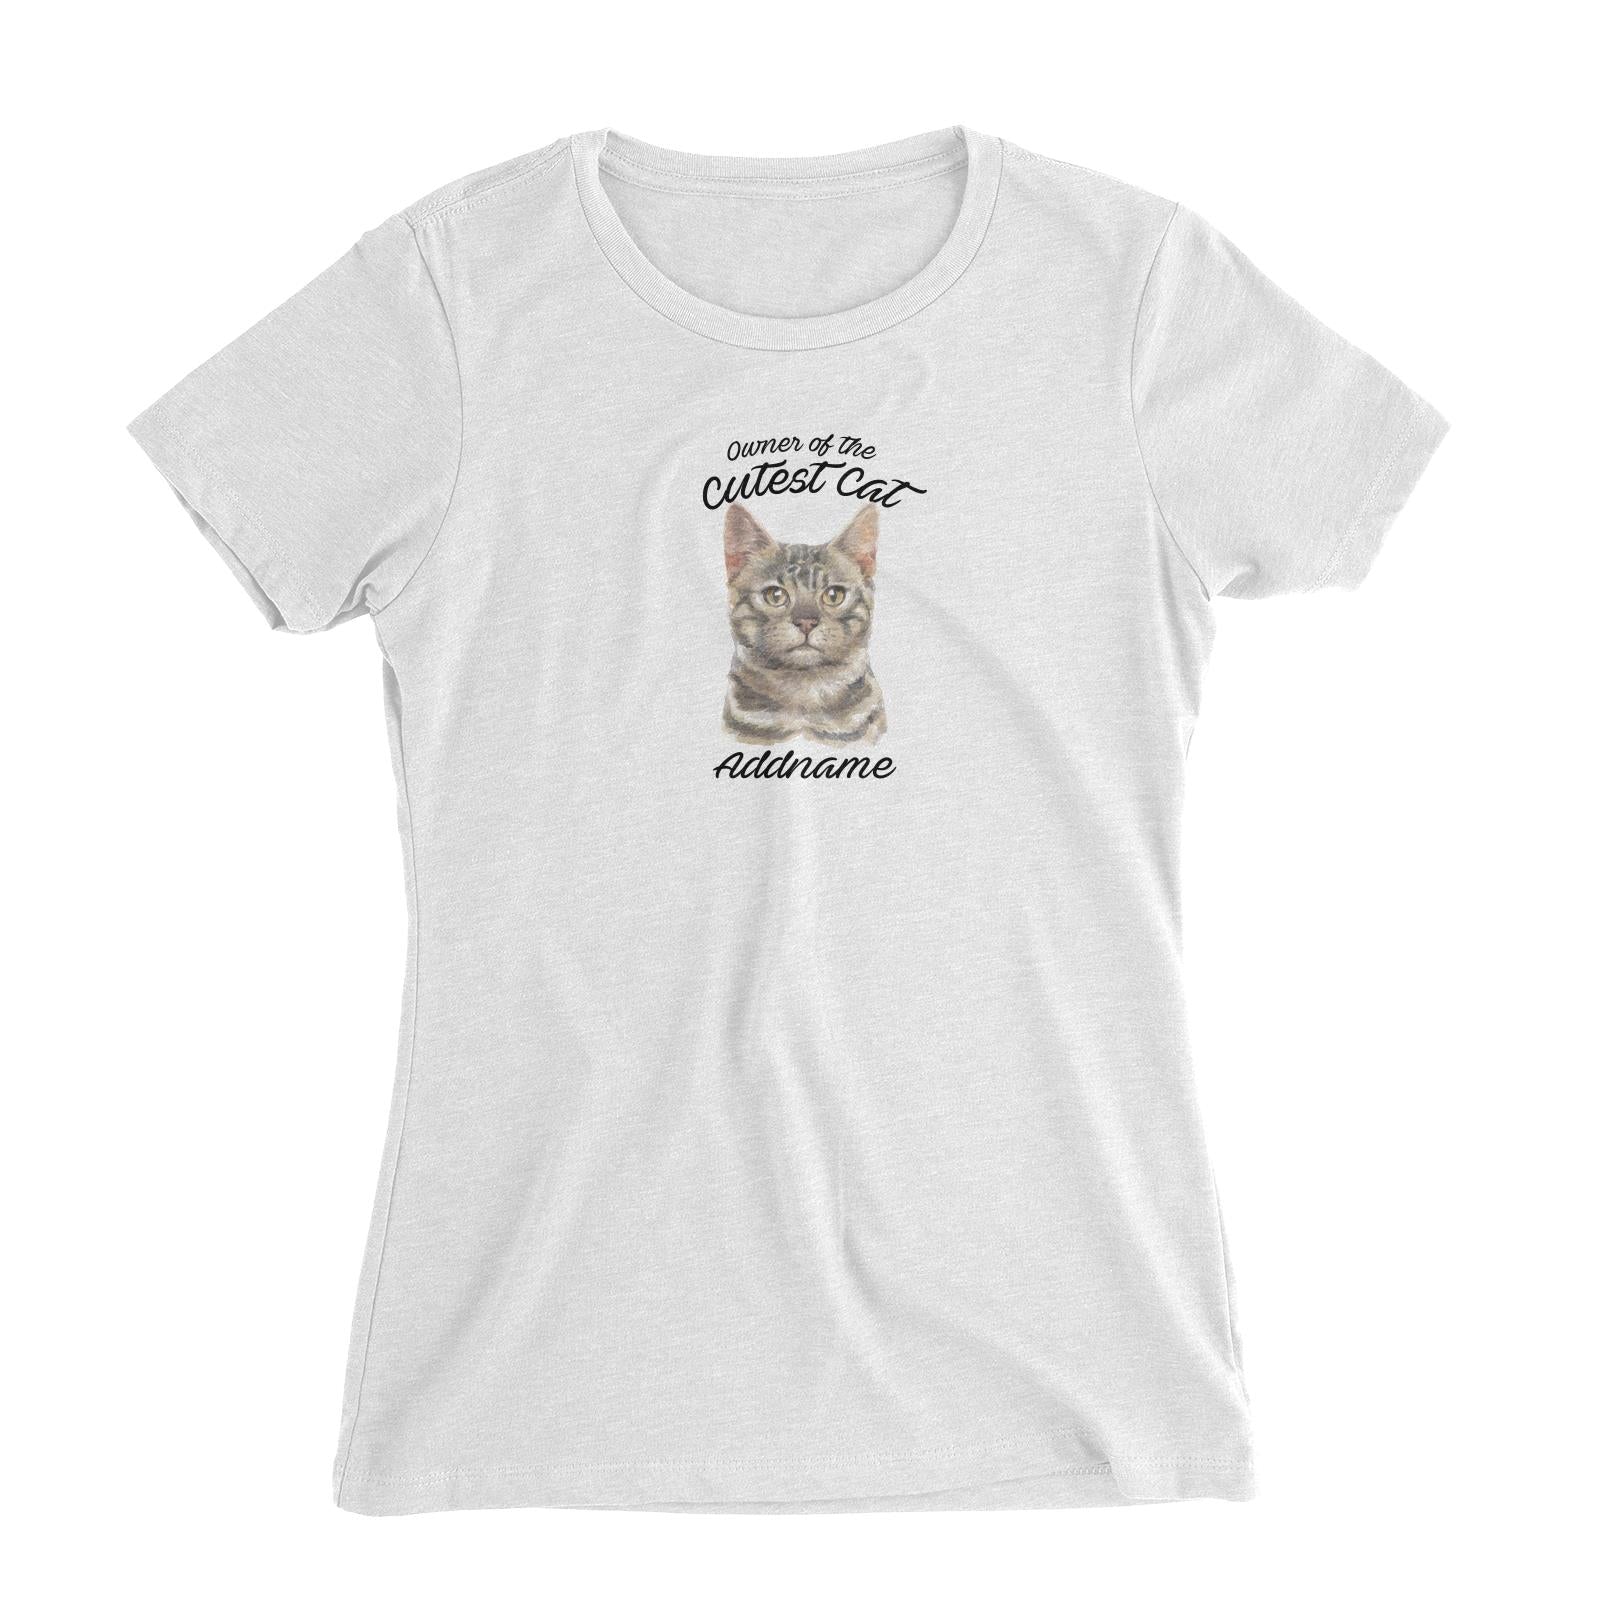 Watercolor Owner Of The Cutest Cat Bengal Grey Addname Women's Slim Fit T-Shirt